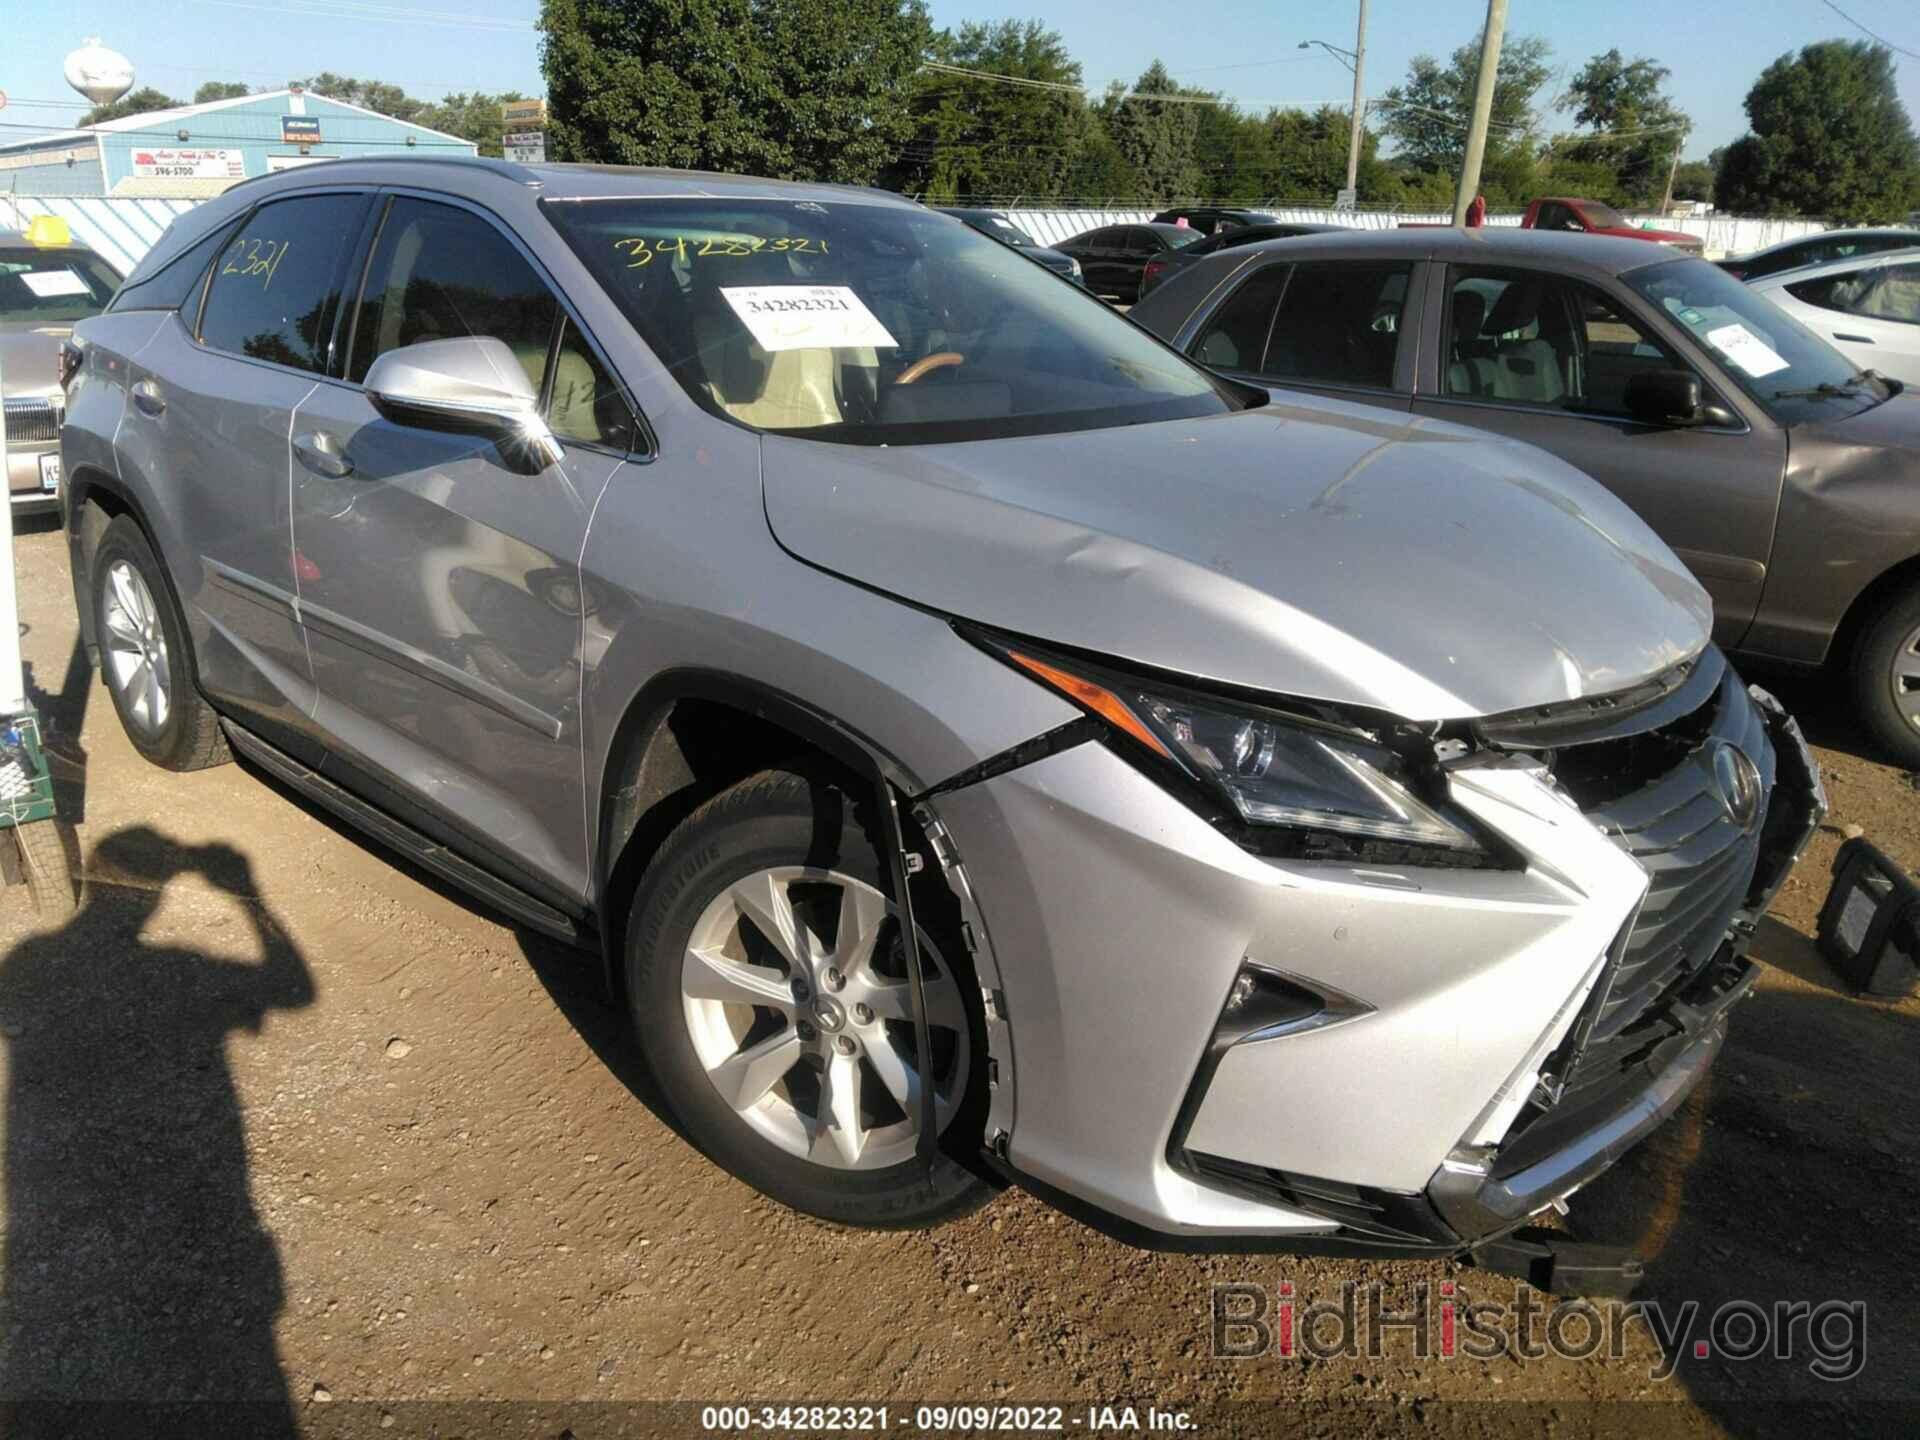 View LEXUS RX history at insurance auctions Copart and IAAI 